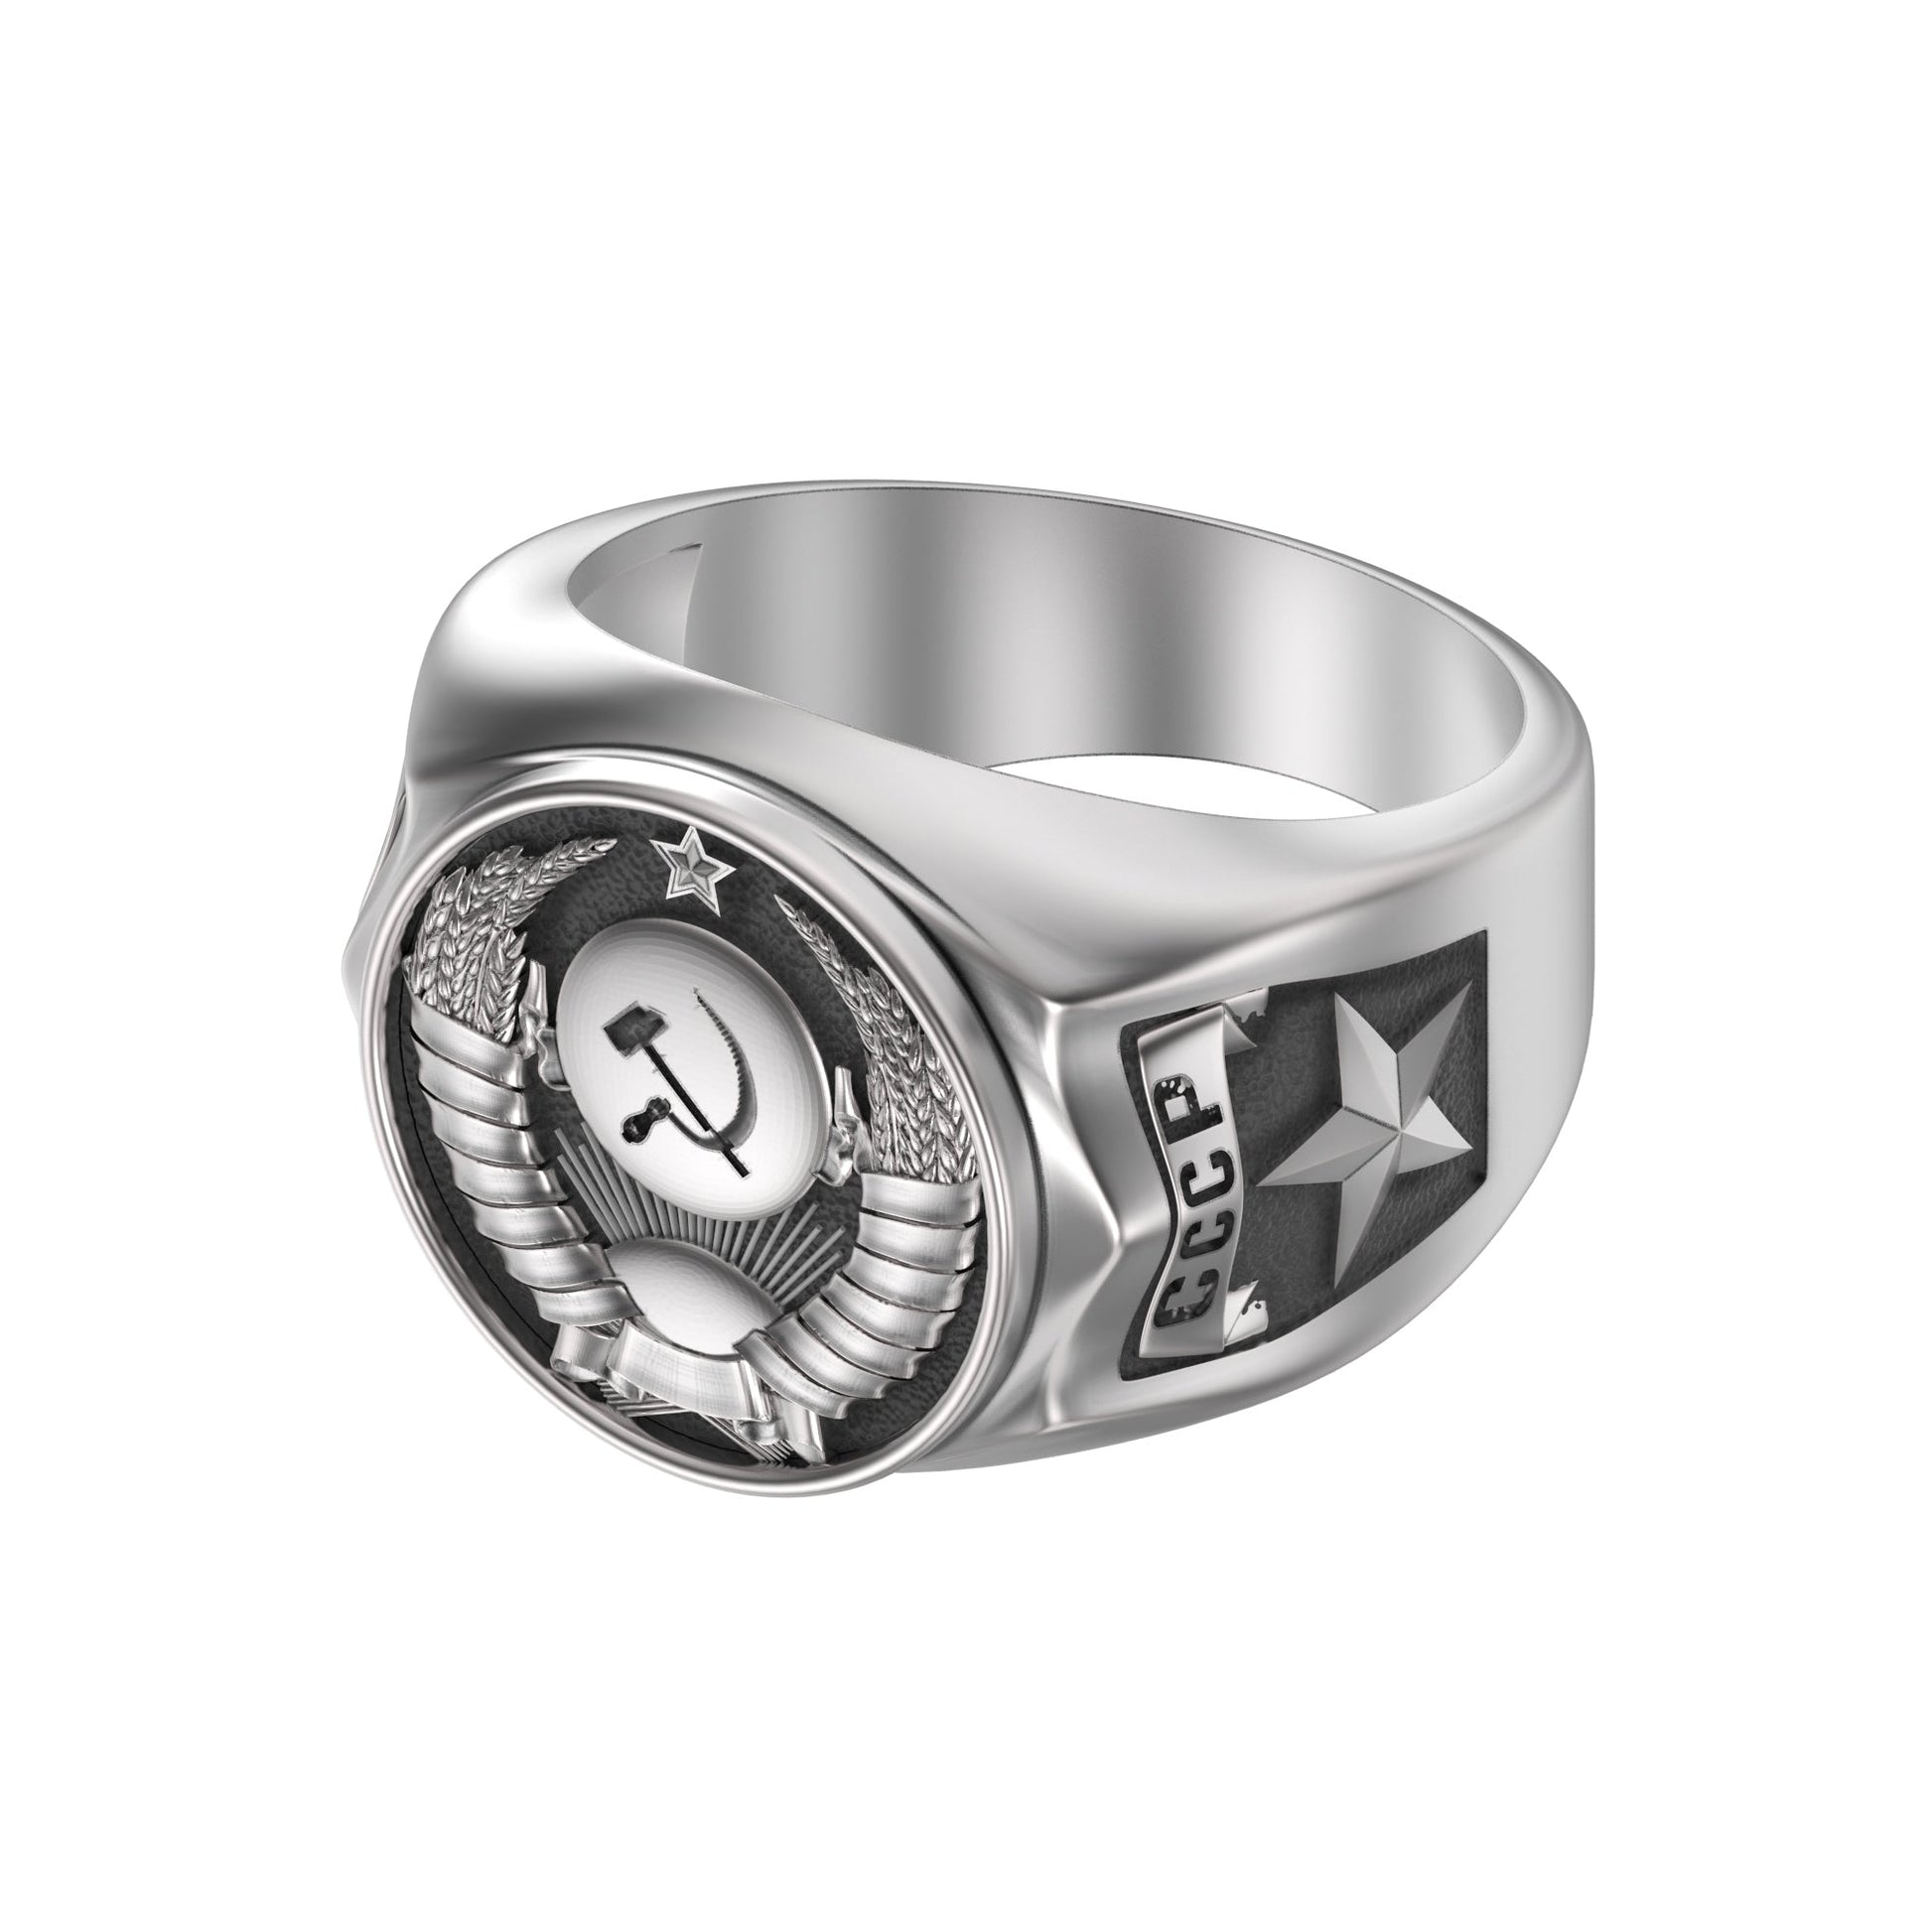 The State Emblem of the USSR, Emblem of the Soviet Union, Sterling Silver Ring